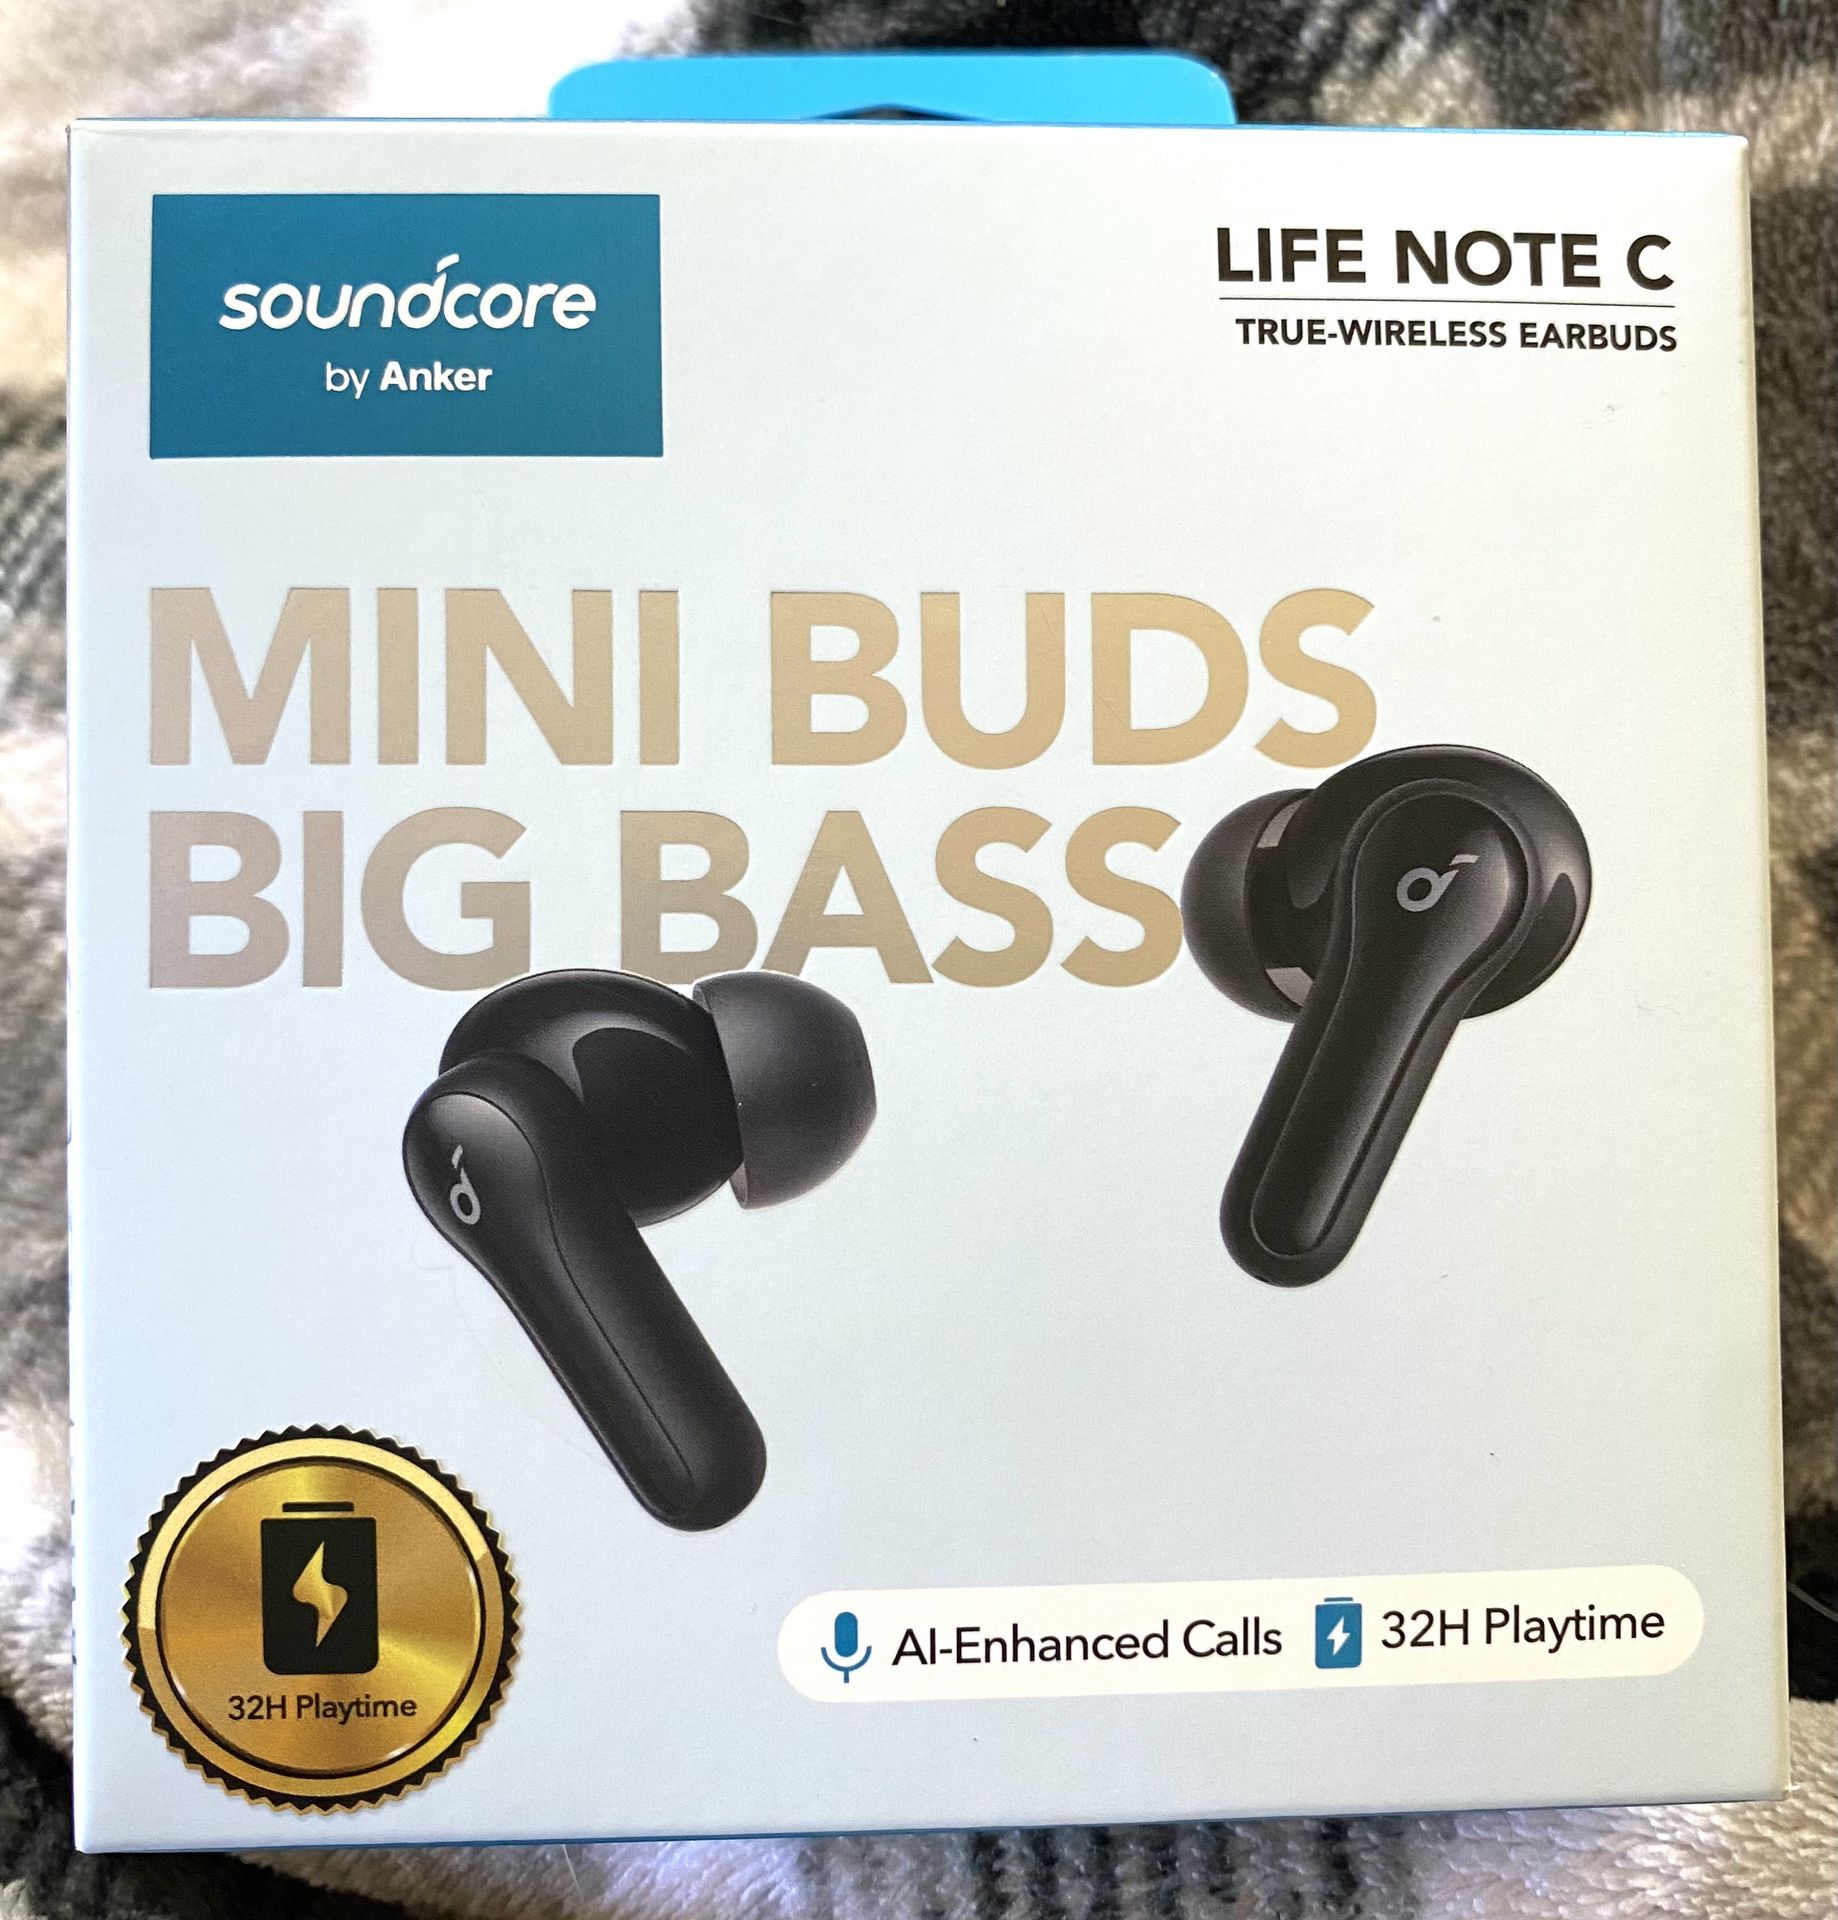 Anker Soundcore Bluetooth Earbuds- Life Note C